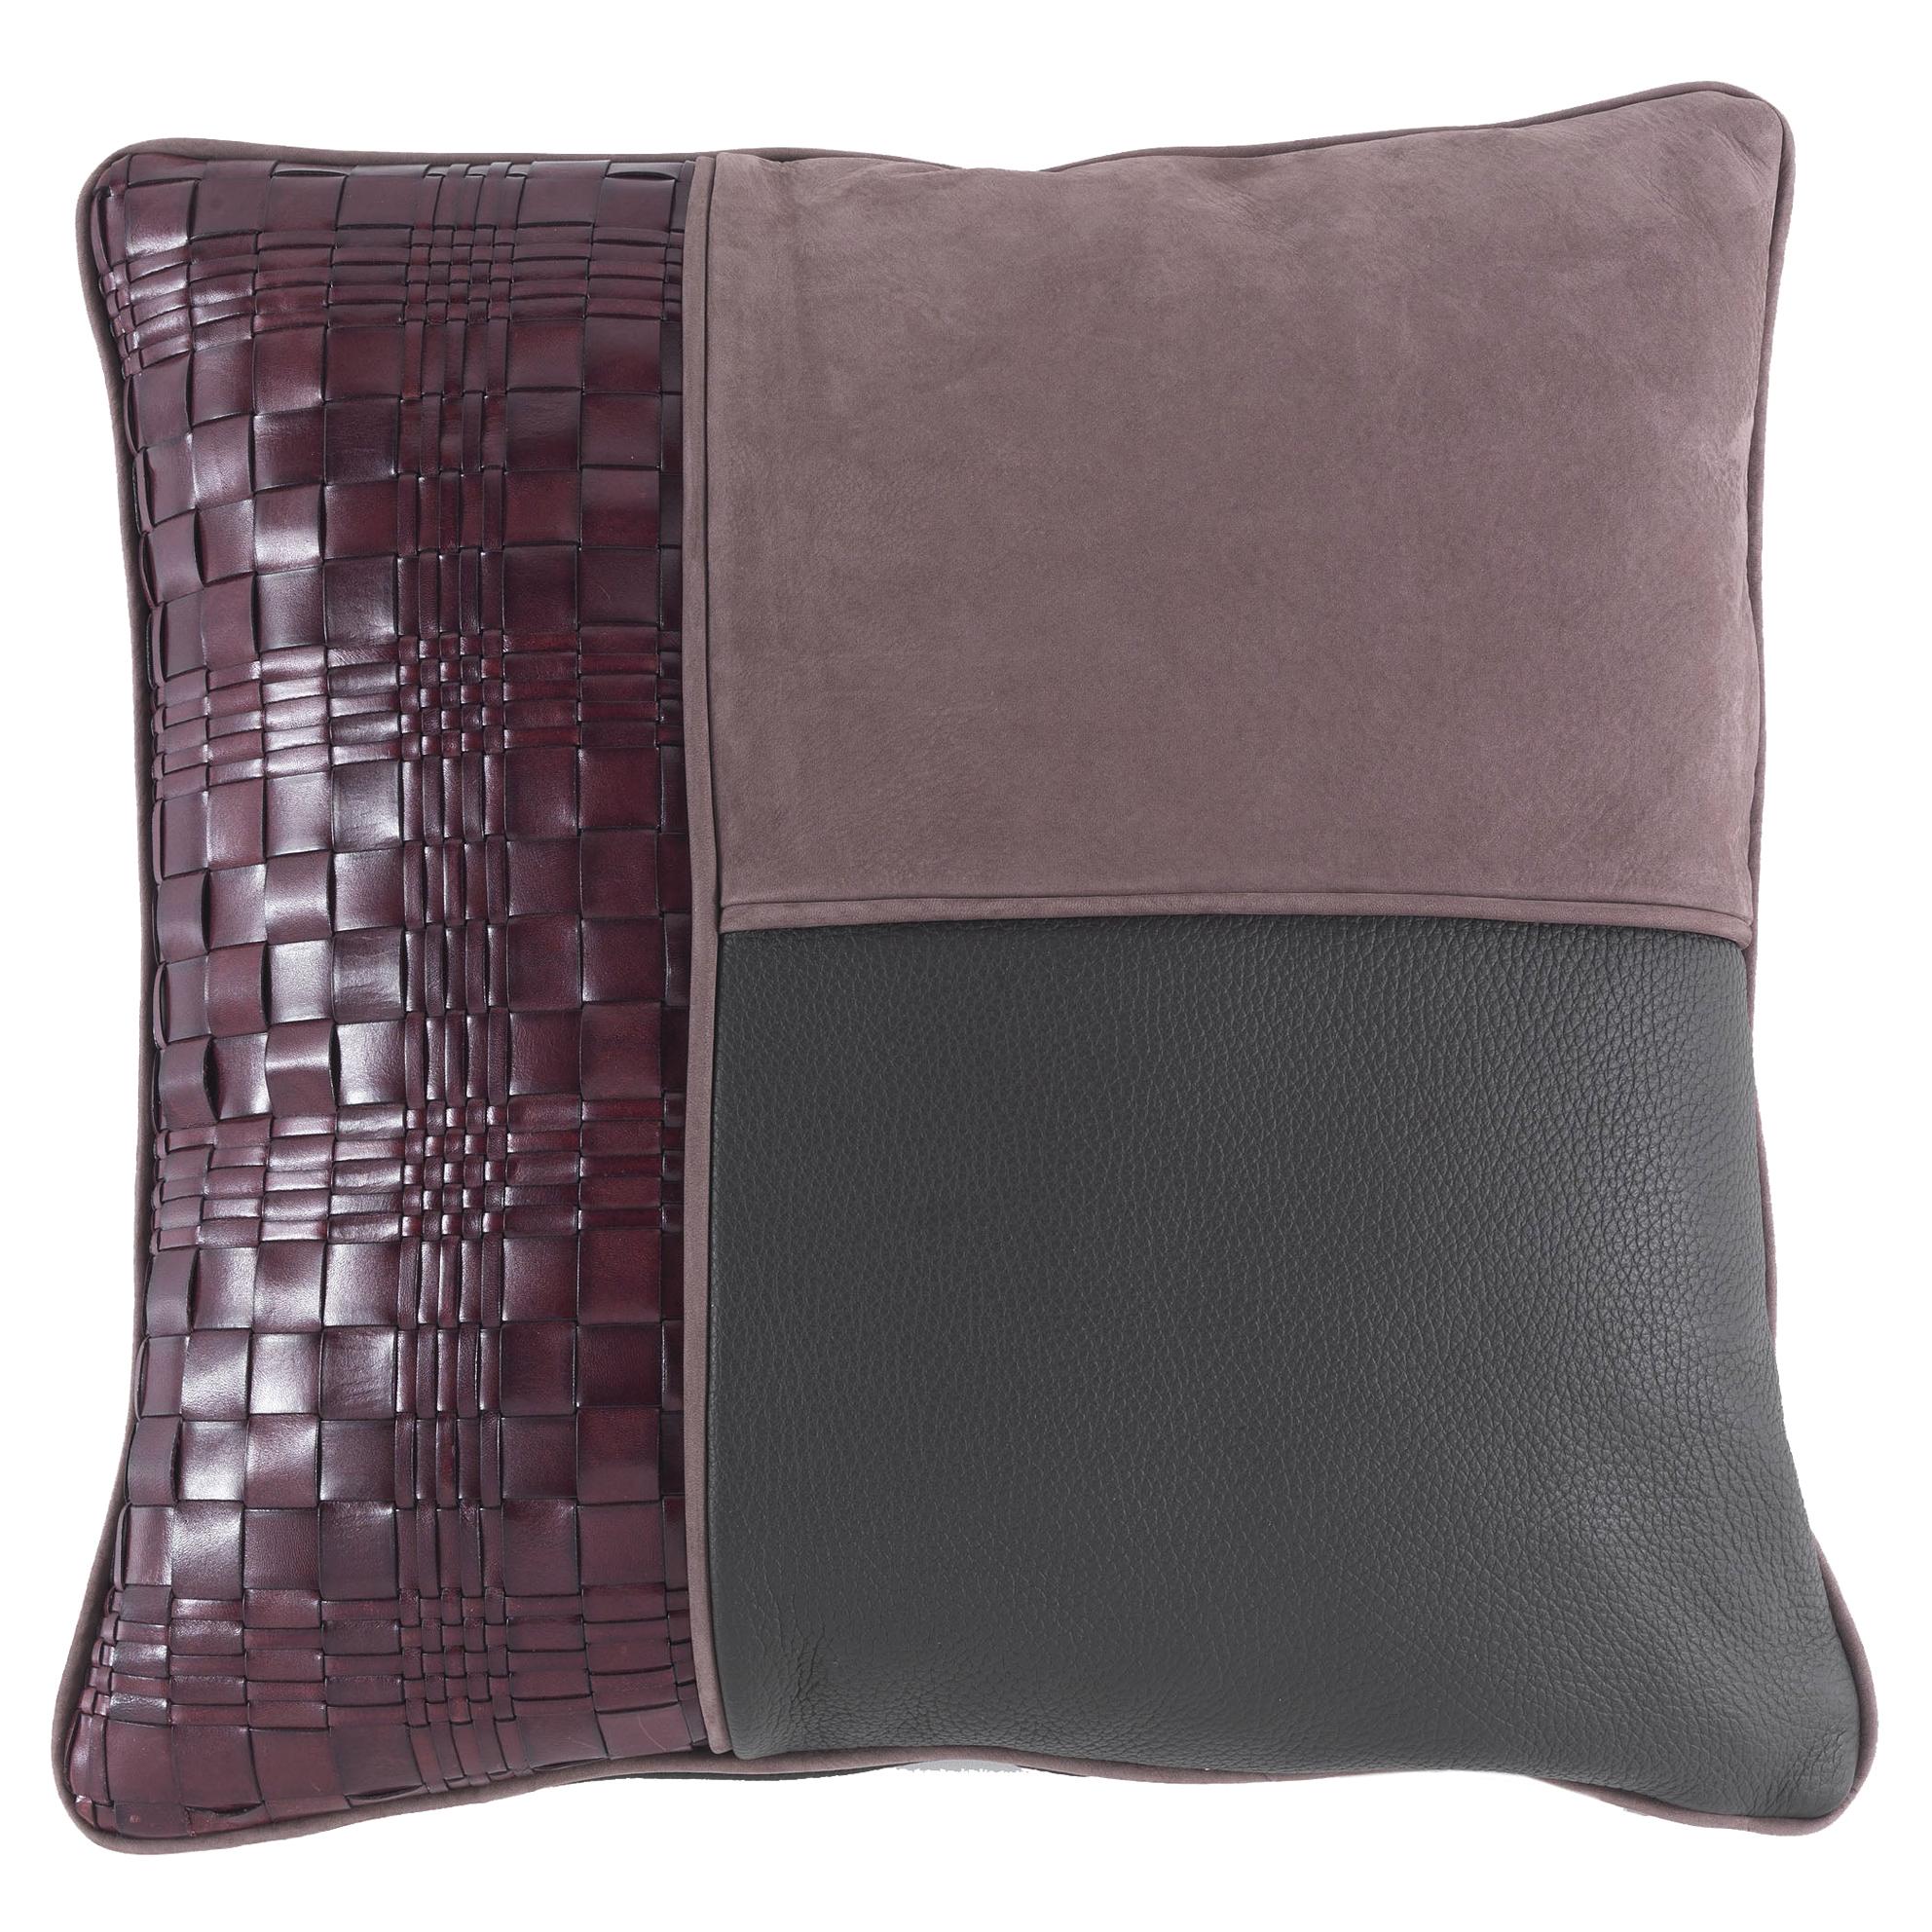 21st Century Tribeca _1 Decorative Cushion in Leather by Gianfranco Ferré Home